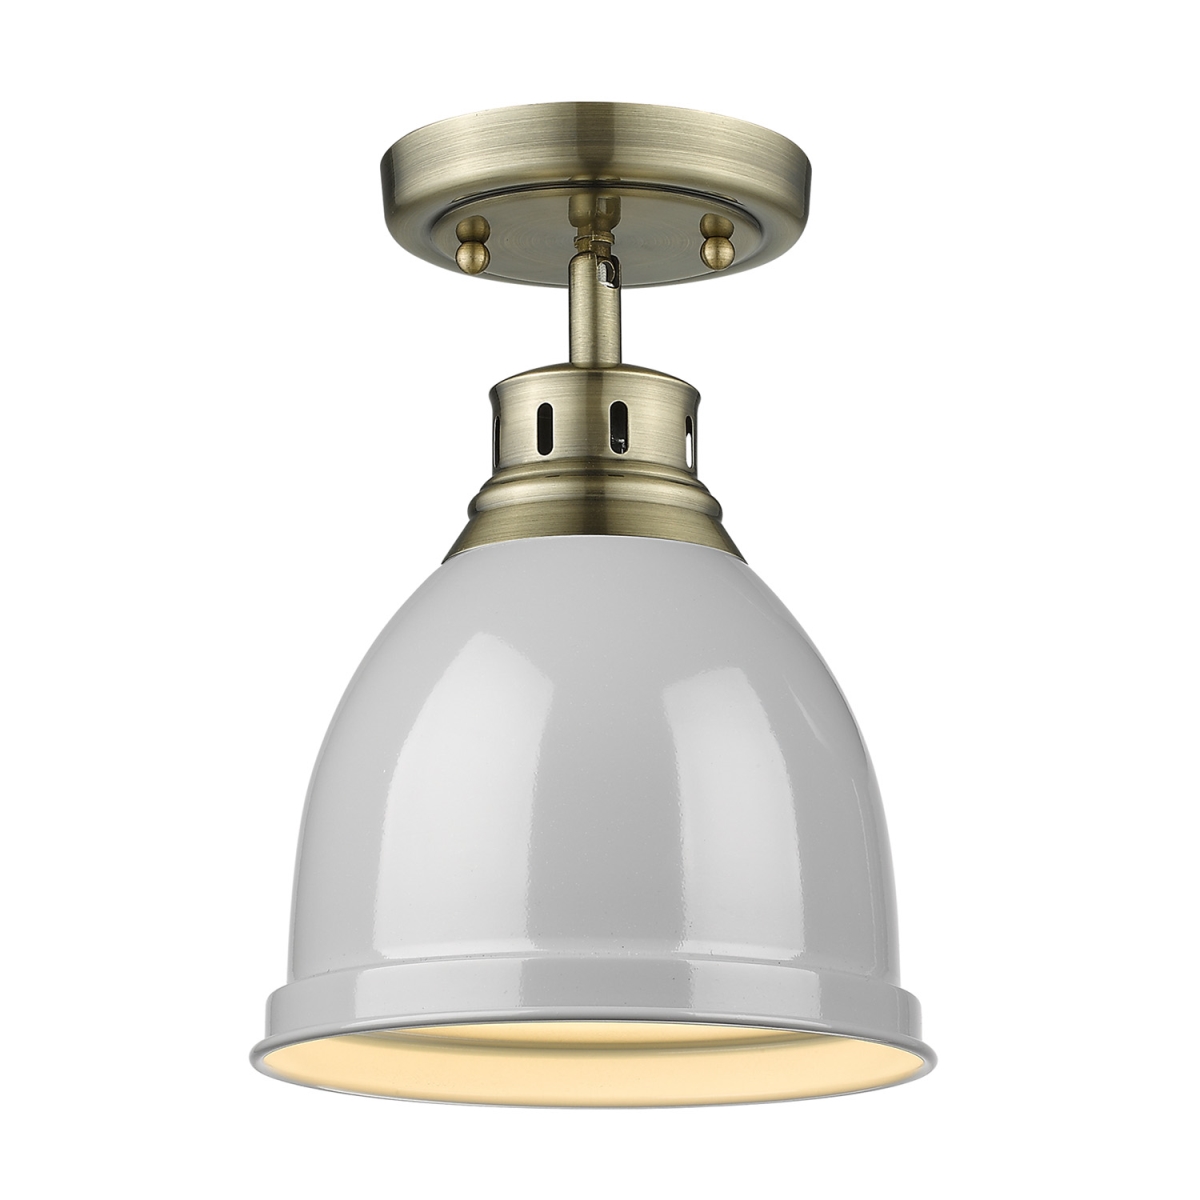 3602-fm Ab-gy Duncan Flush Mount Light With Gray Shade, Aged Brass